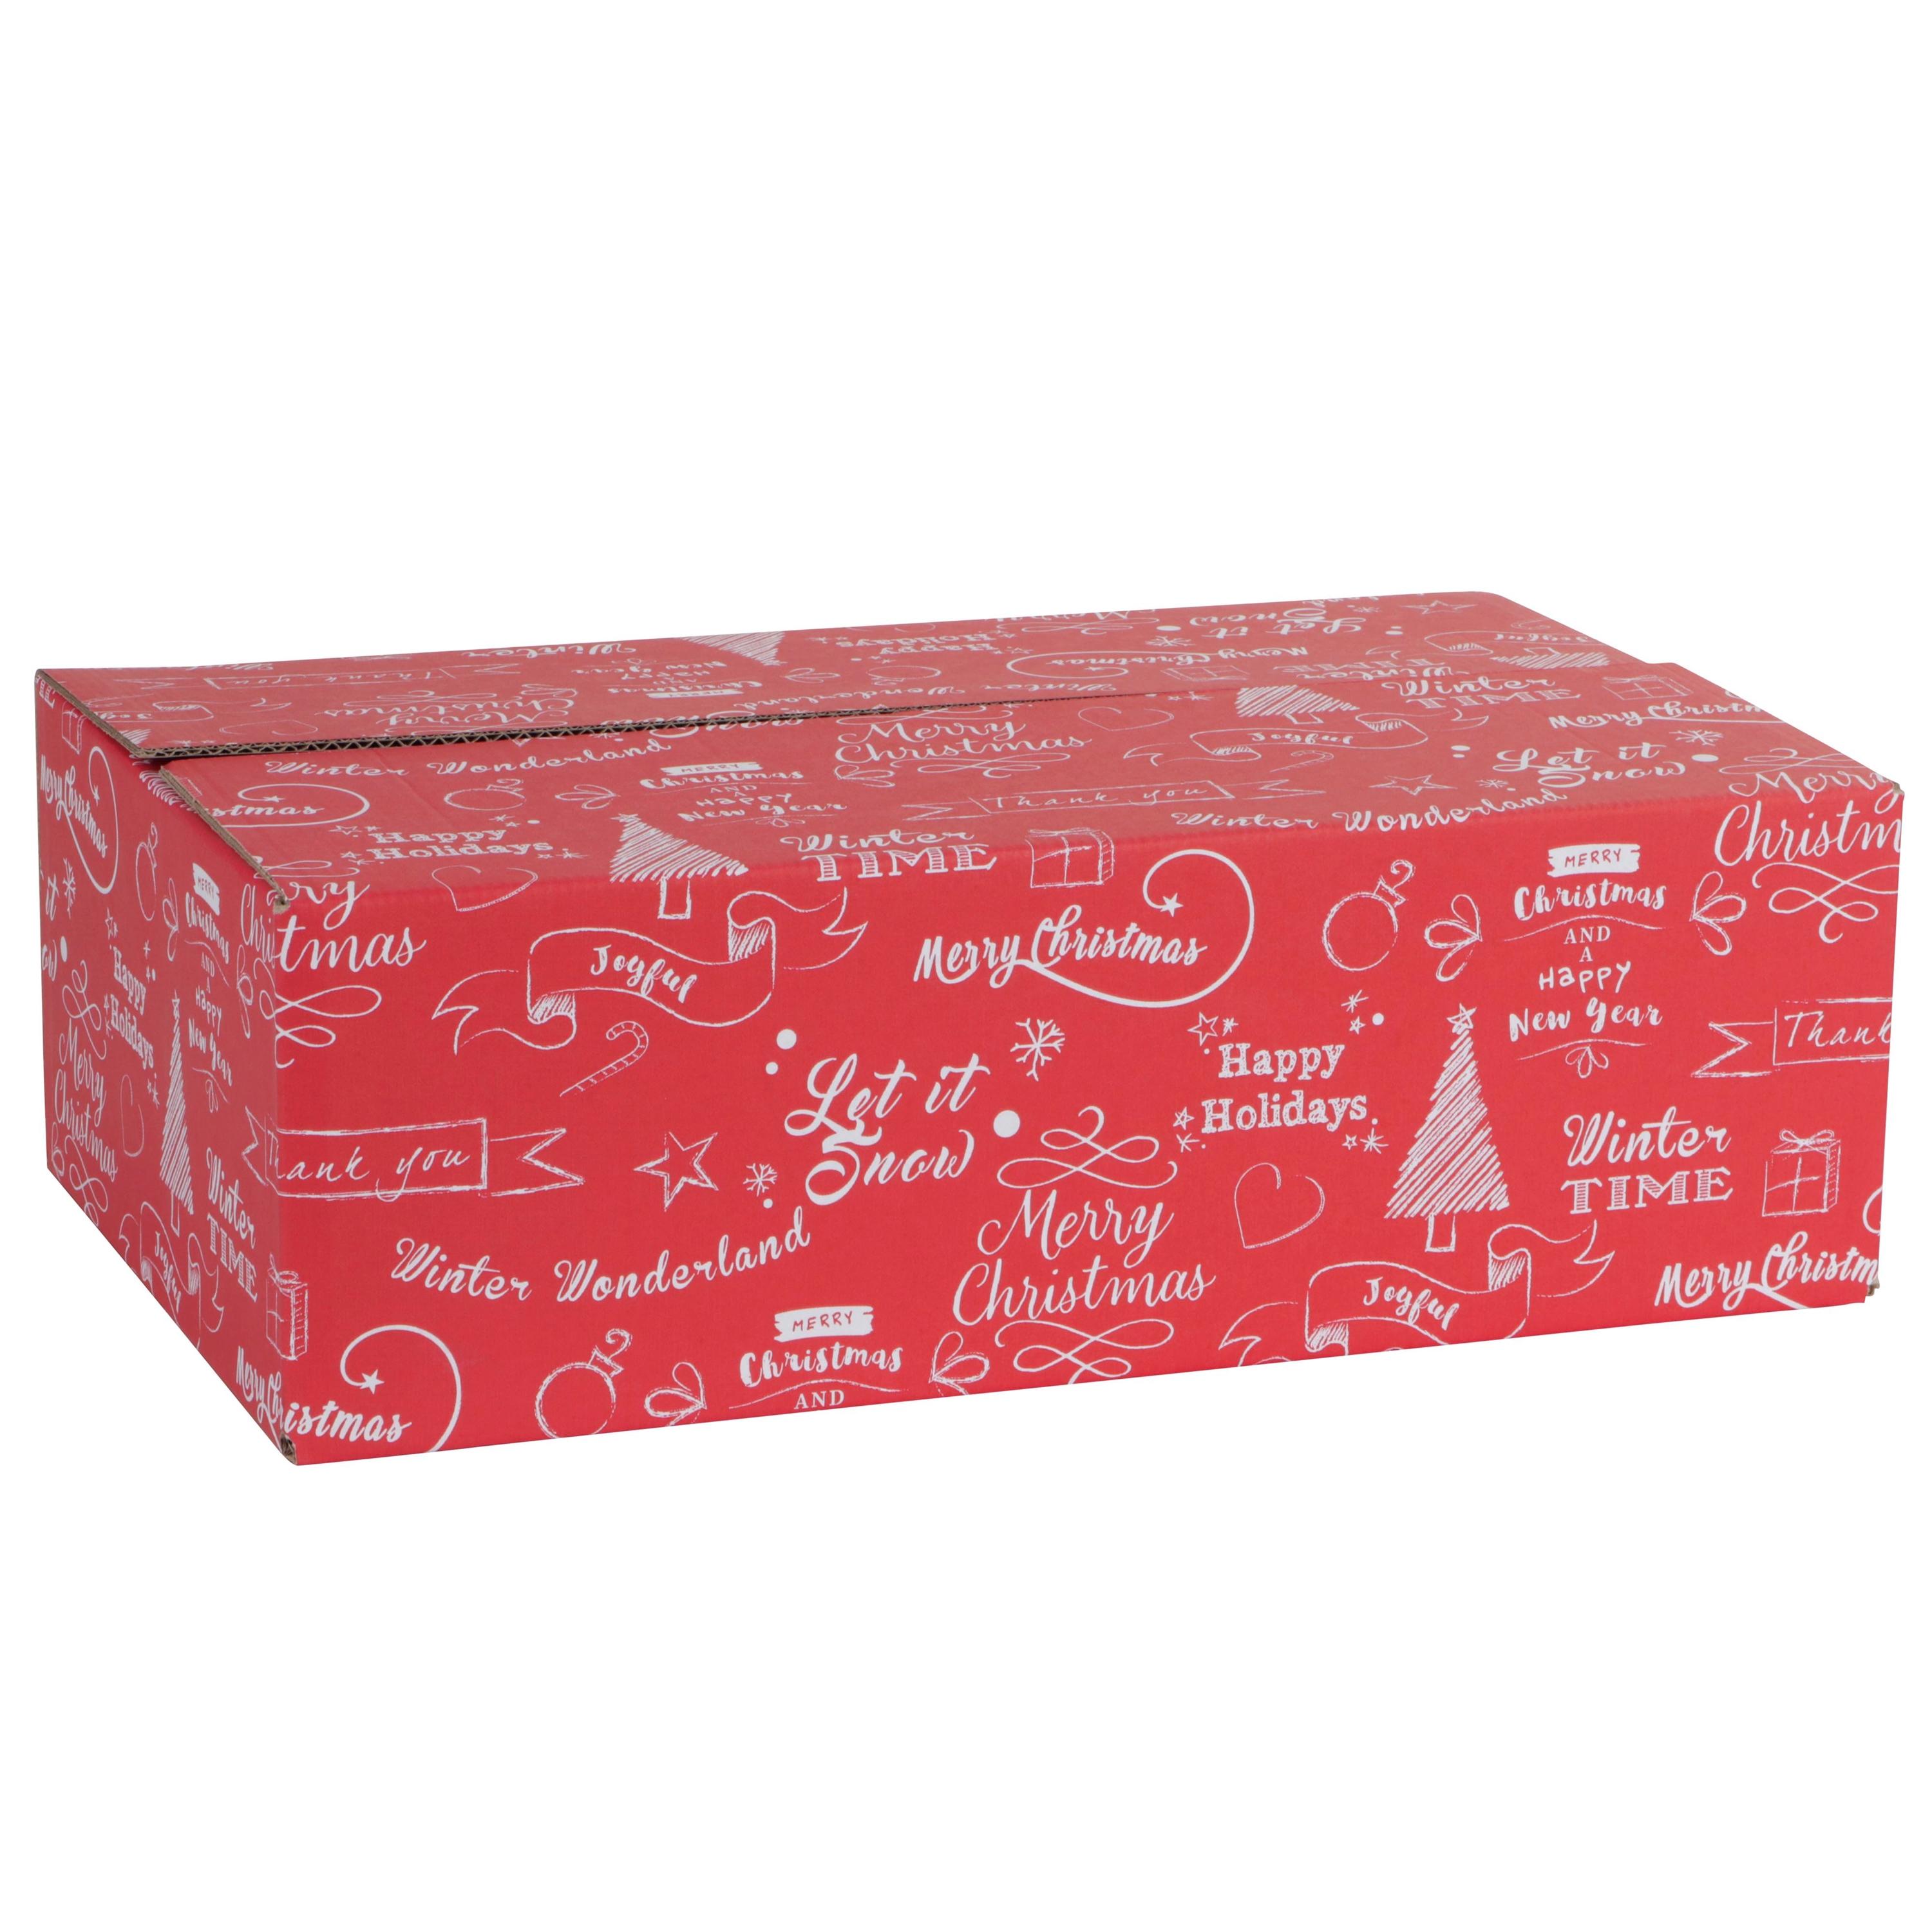 Picture of Kerstdoos F150 Happy Holidays rood 49x29x15 cm (ucl)